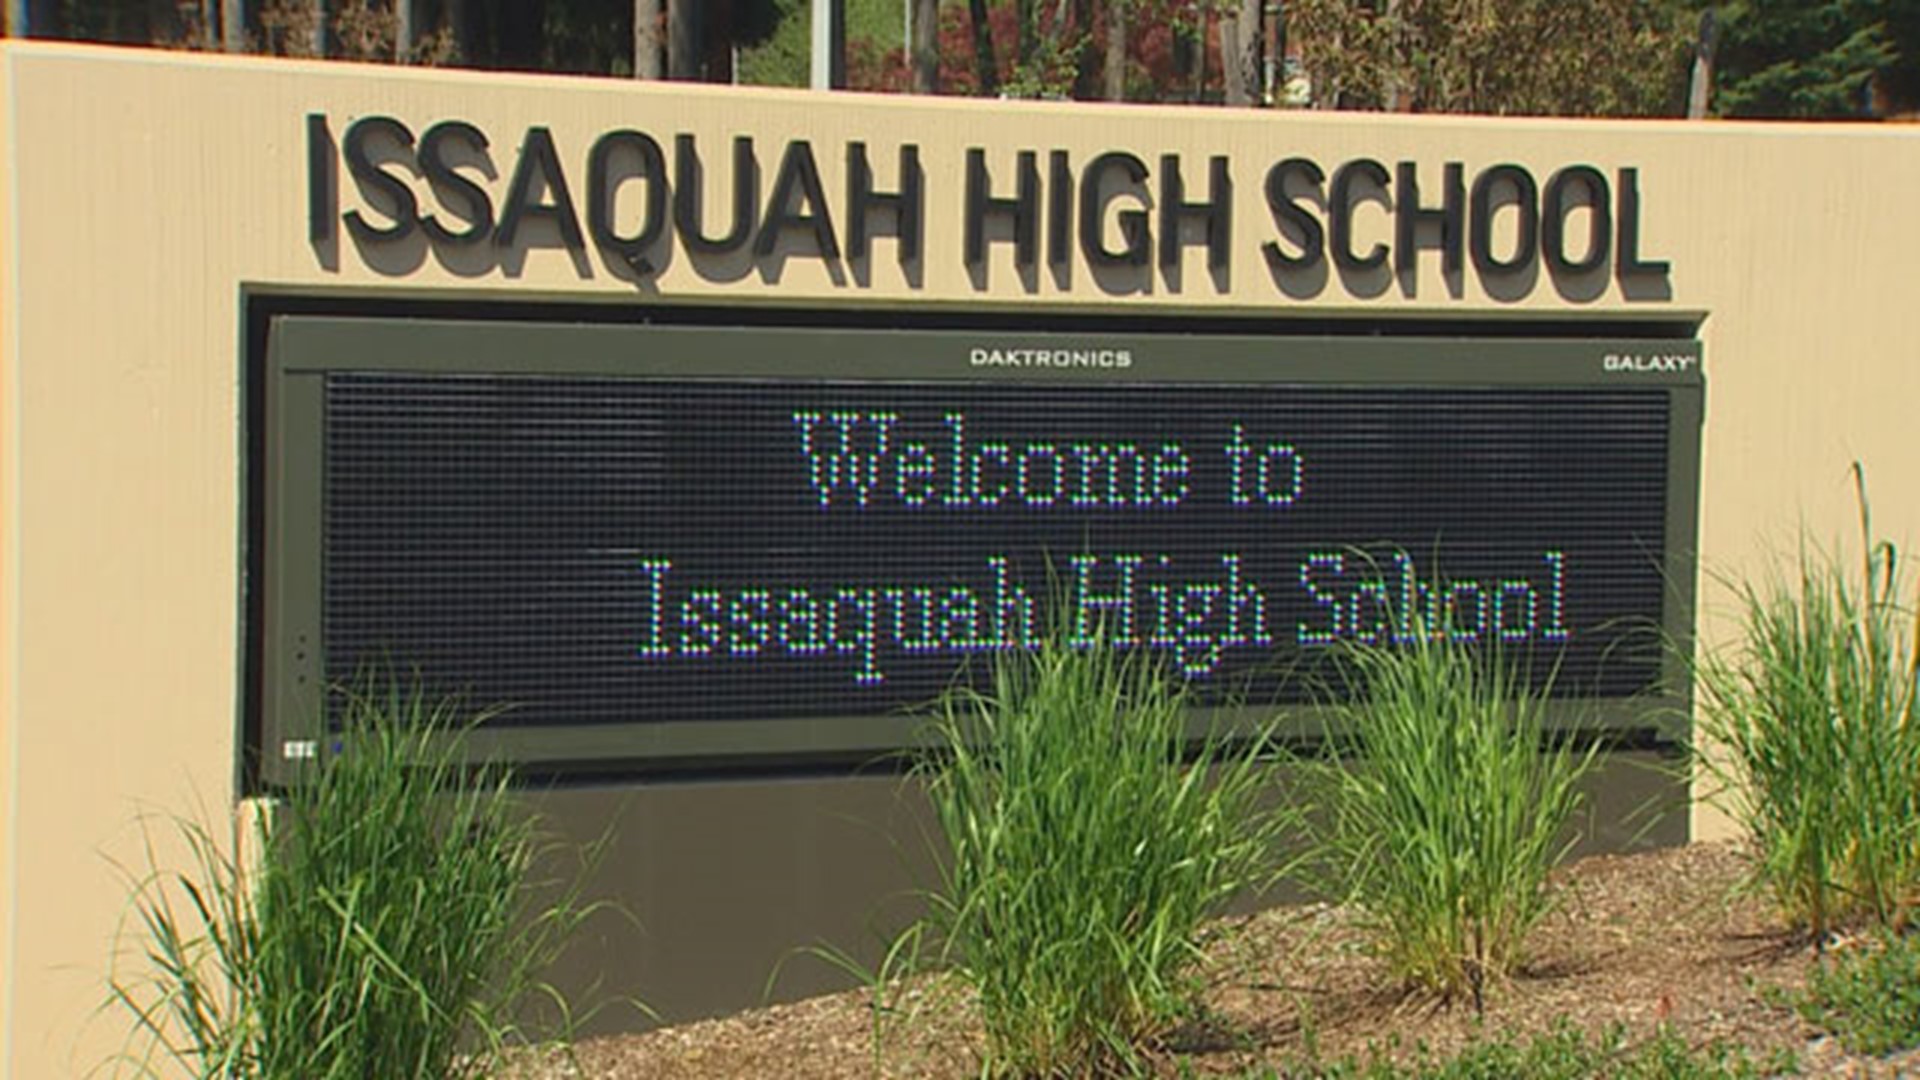 Health officials are recommending anyone who attended the September 10 Issaquah High School football game be tested for COVID after several students test positive